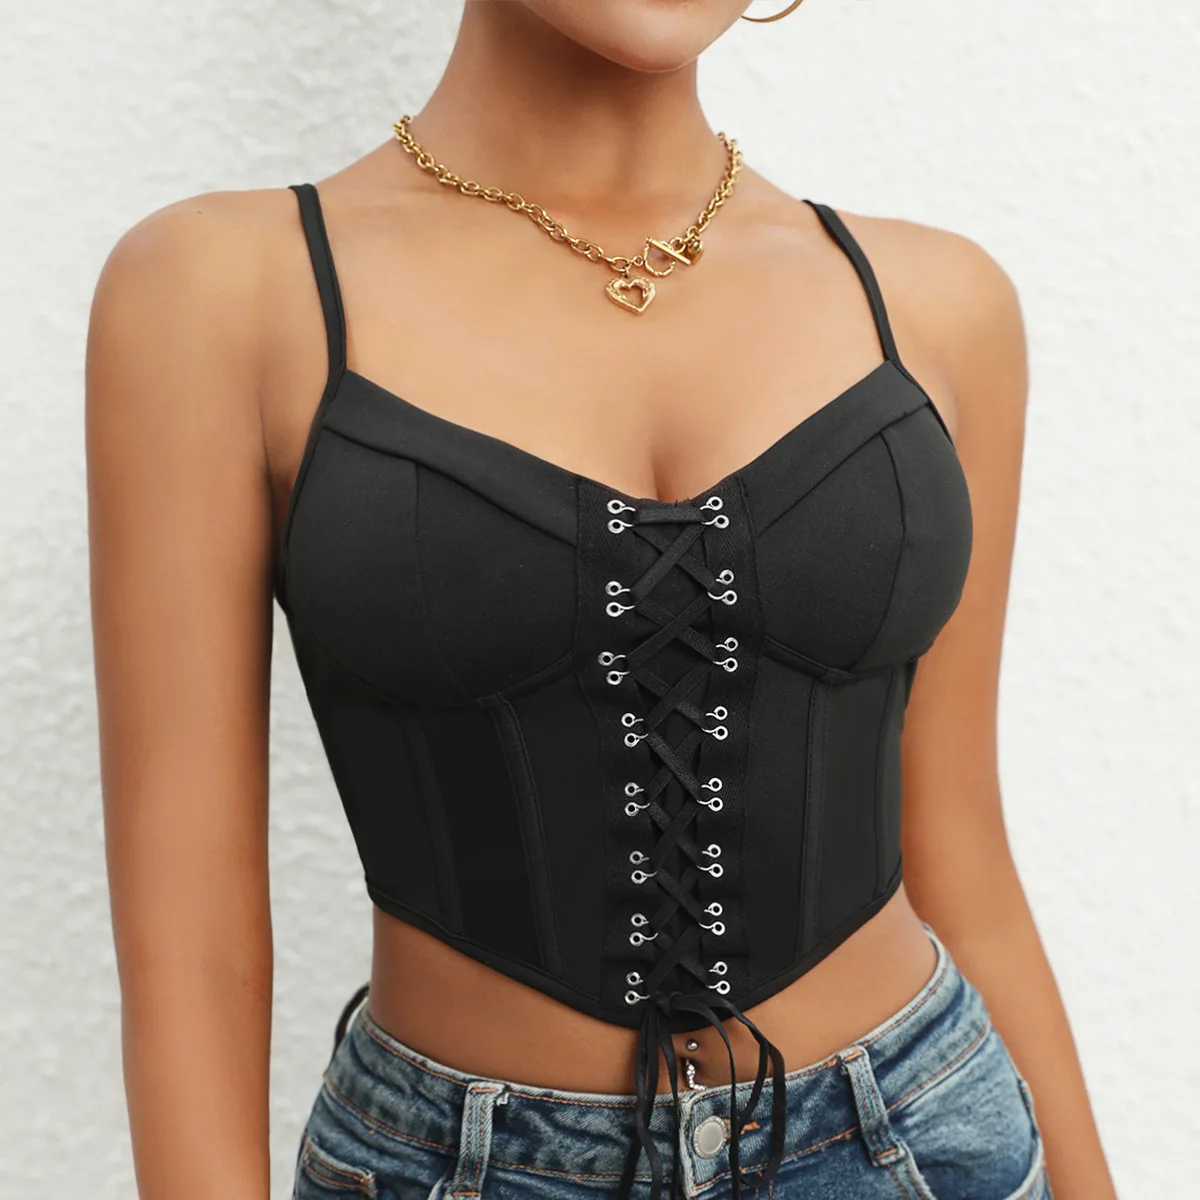 

Fashion Hot Girl Lace Up Crop Cami Tops Sleeveless Spaghetti Strap Corset Bustier Camisole Lingerie Crop Tops Party Nightclub